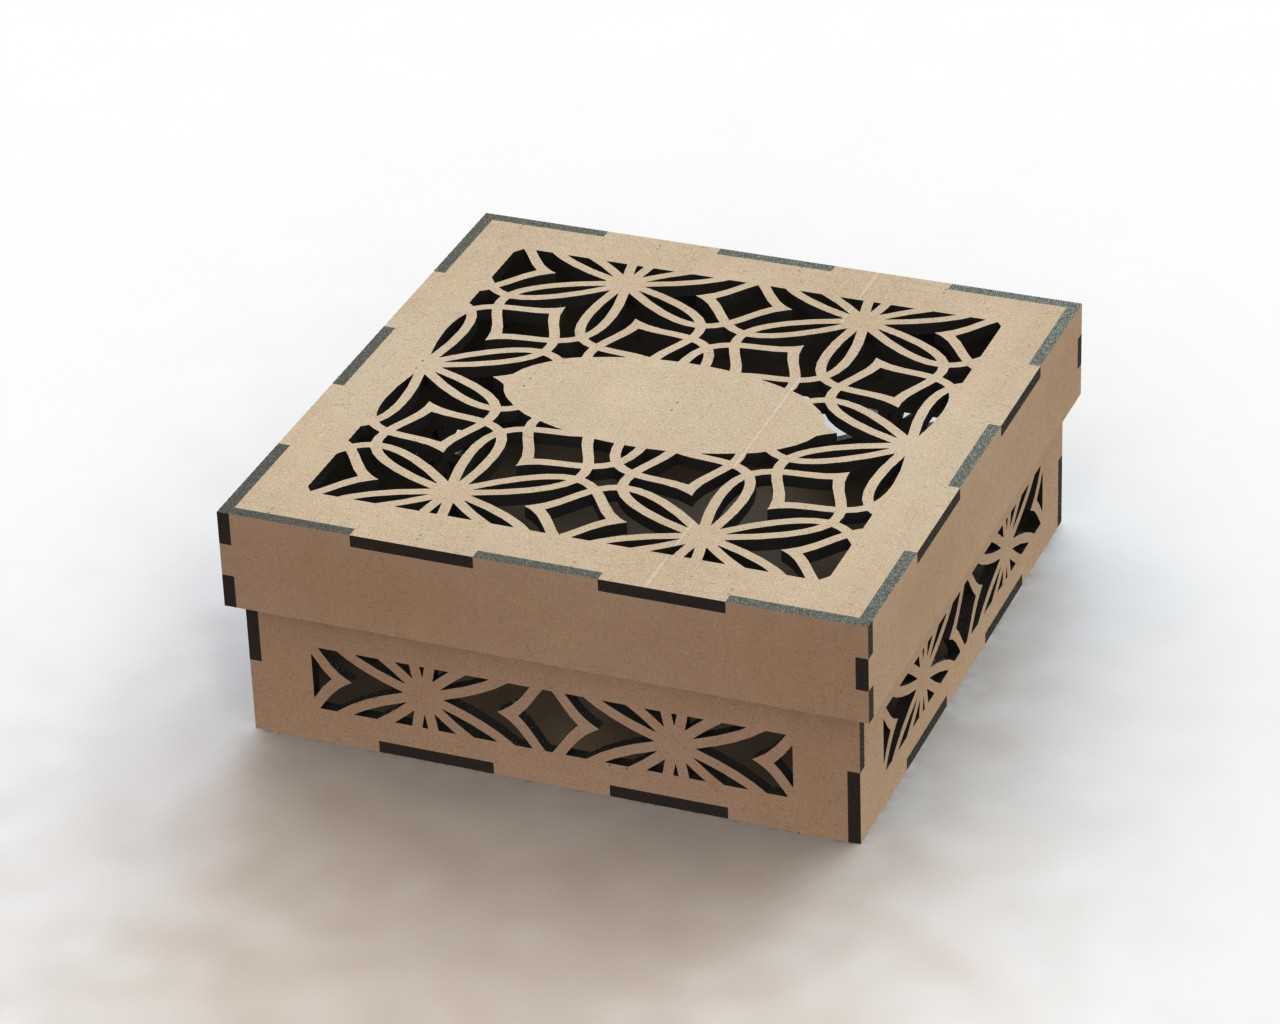 CNC Laser Cut Wood Gift Box Template DXF File